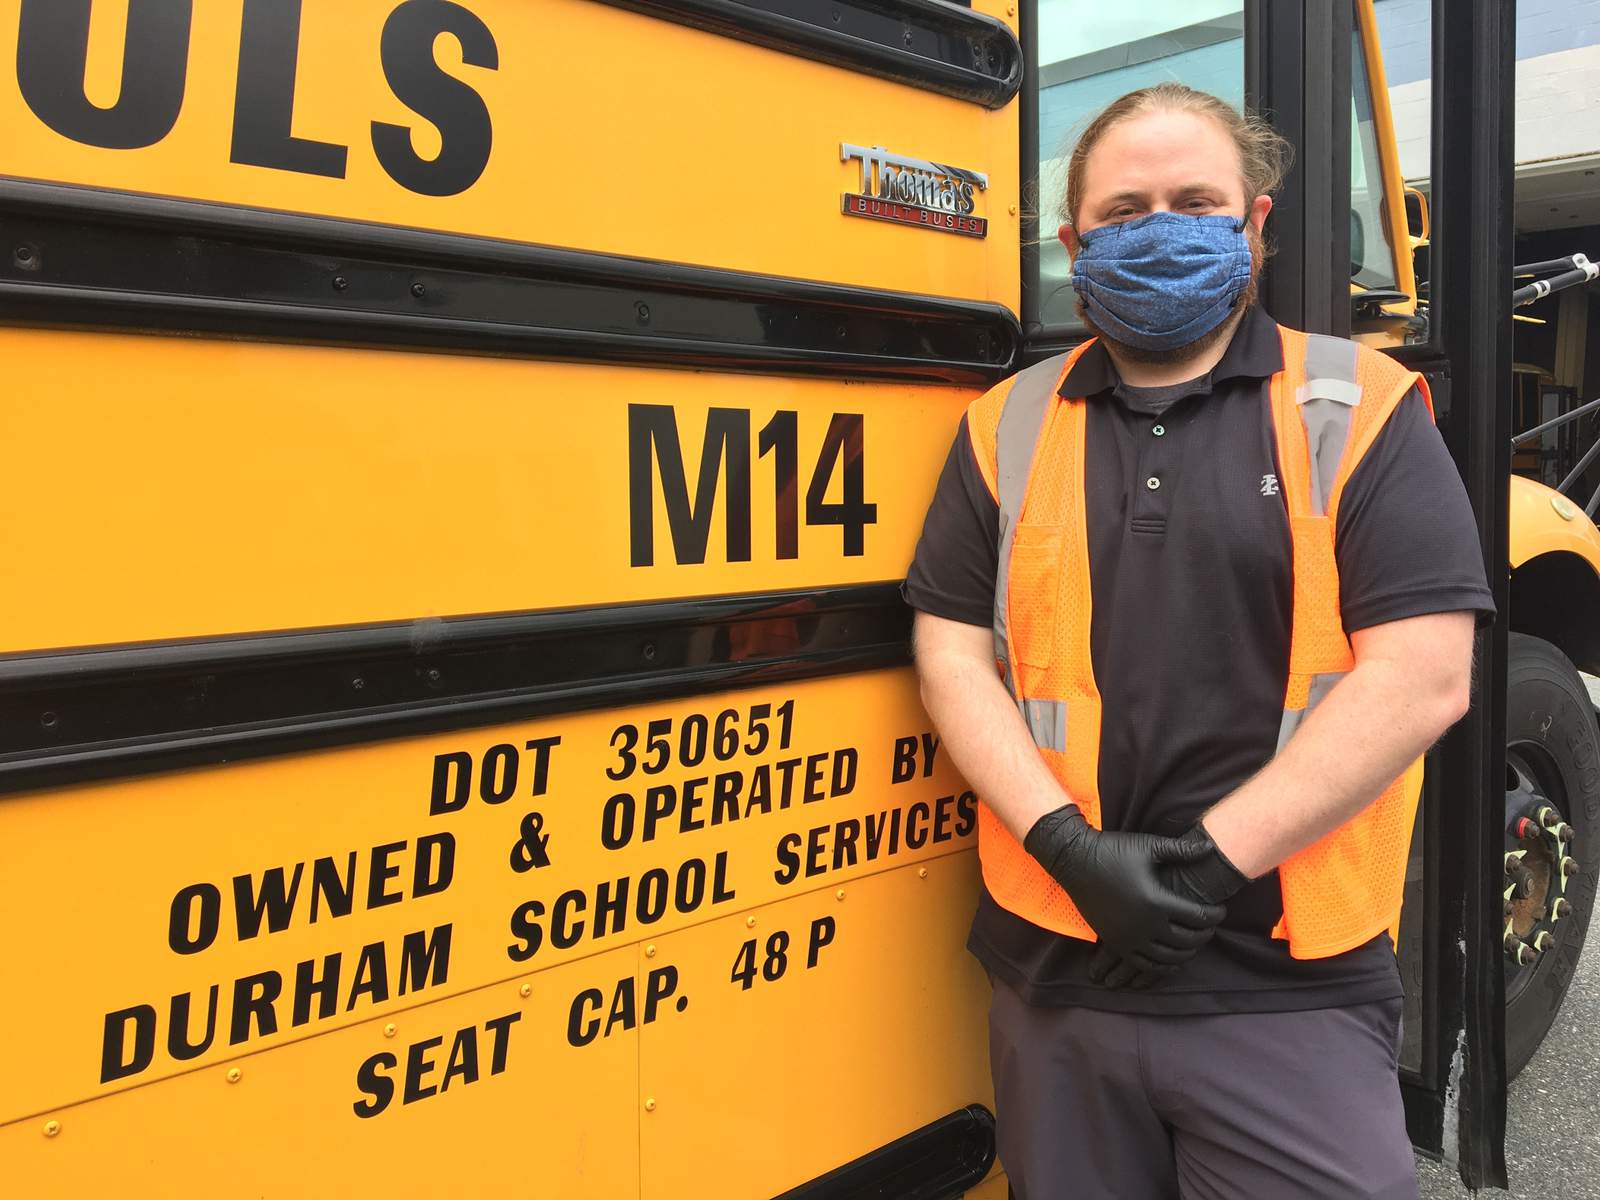 Inspired by the kids he drove every day, a school bus driver got his college degree to become a teacher